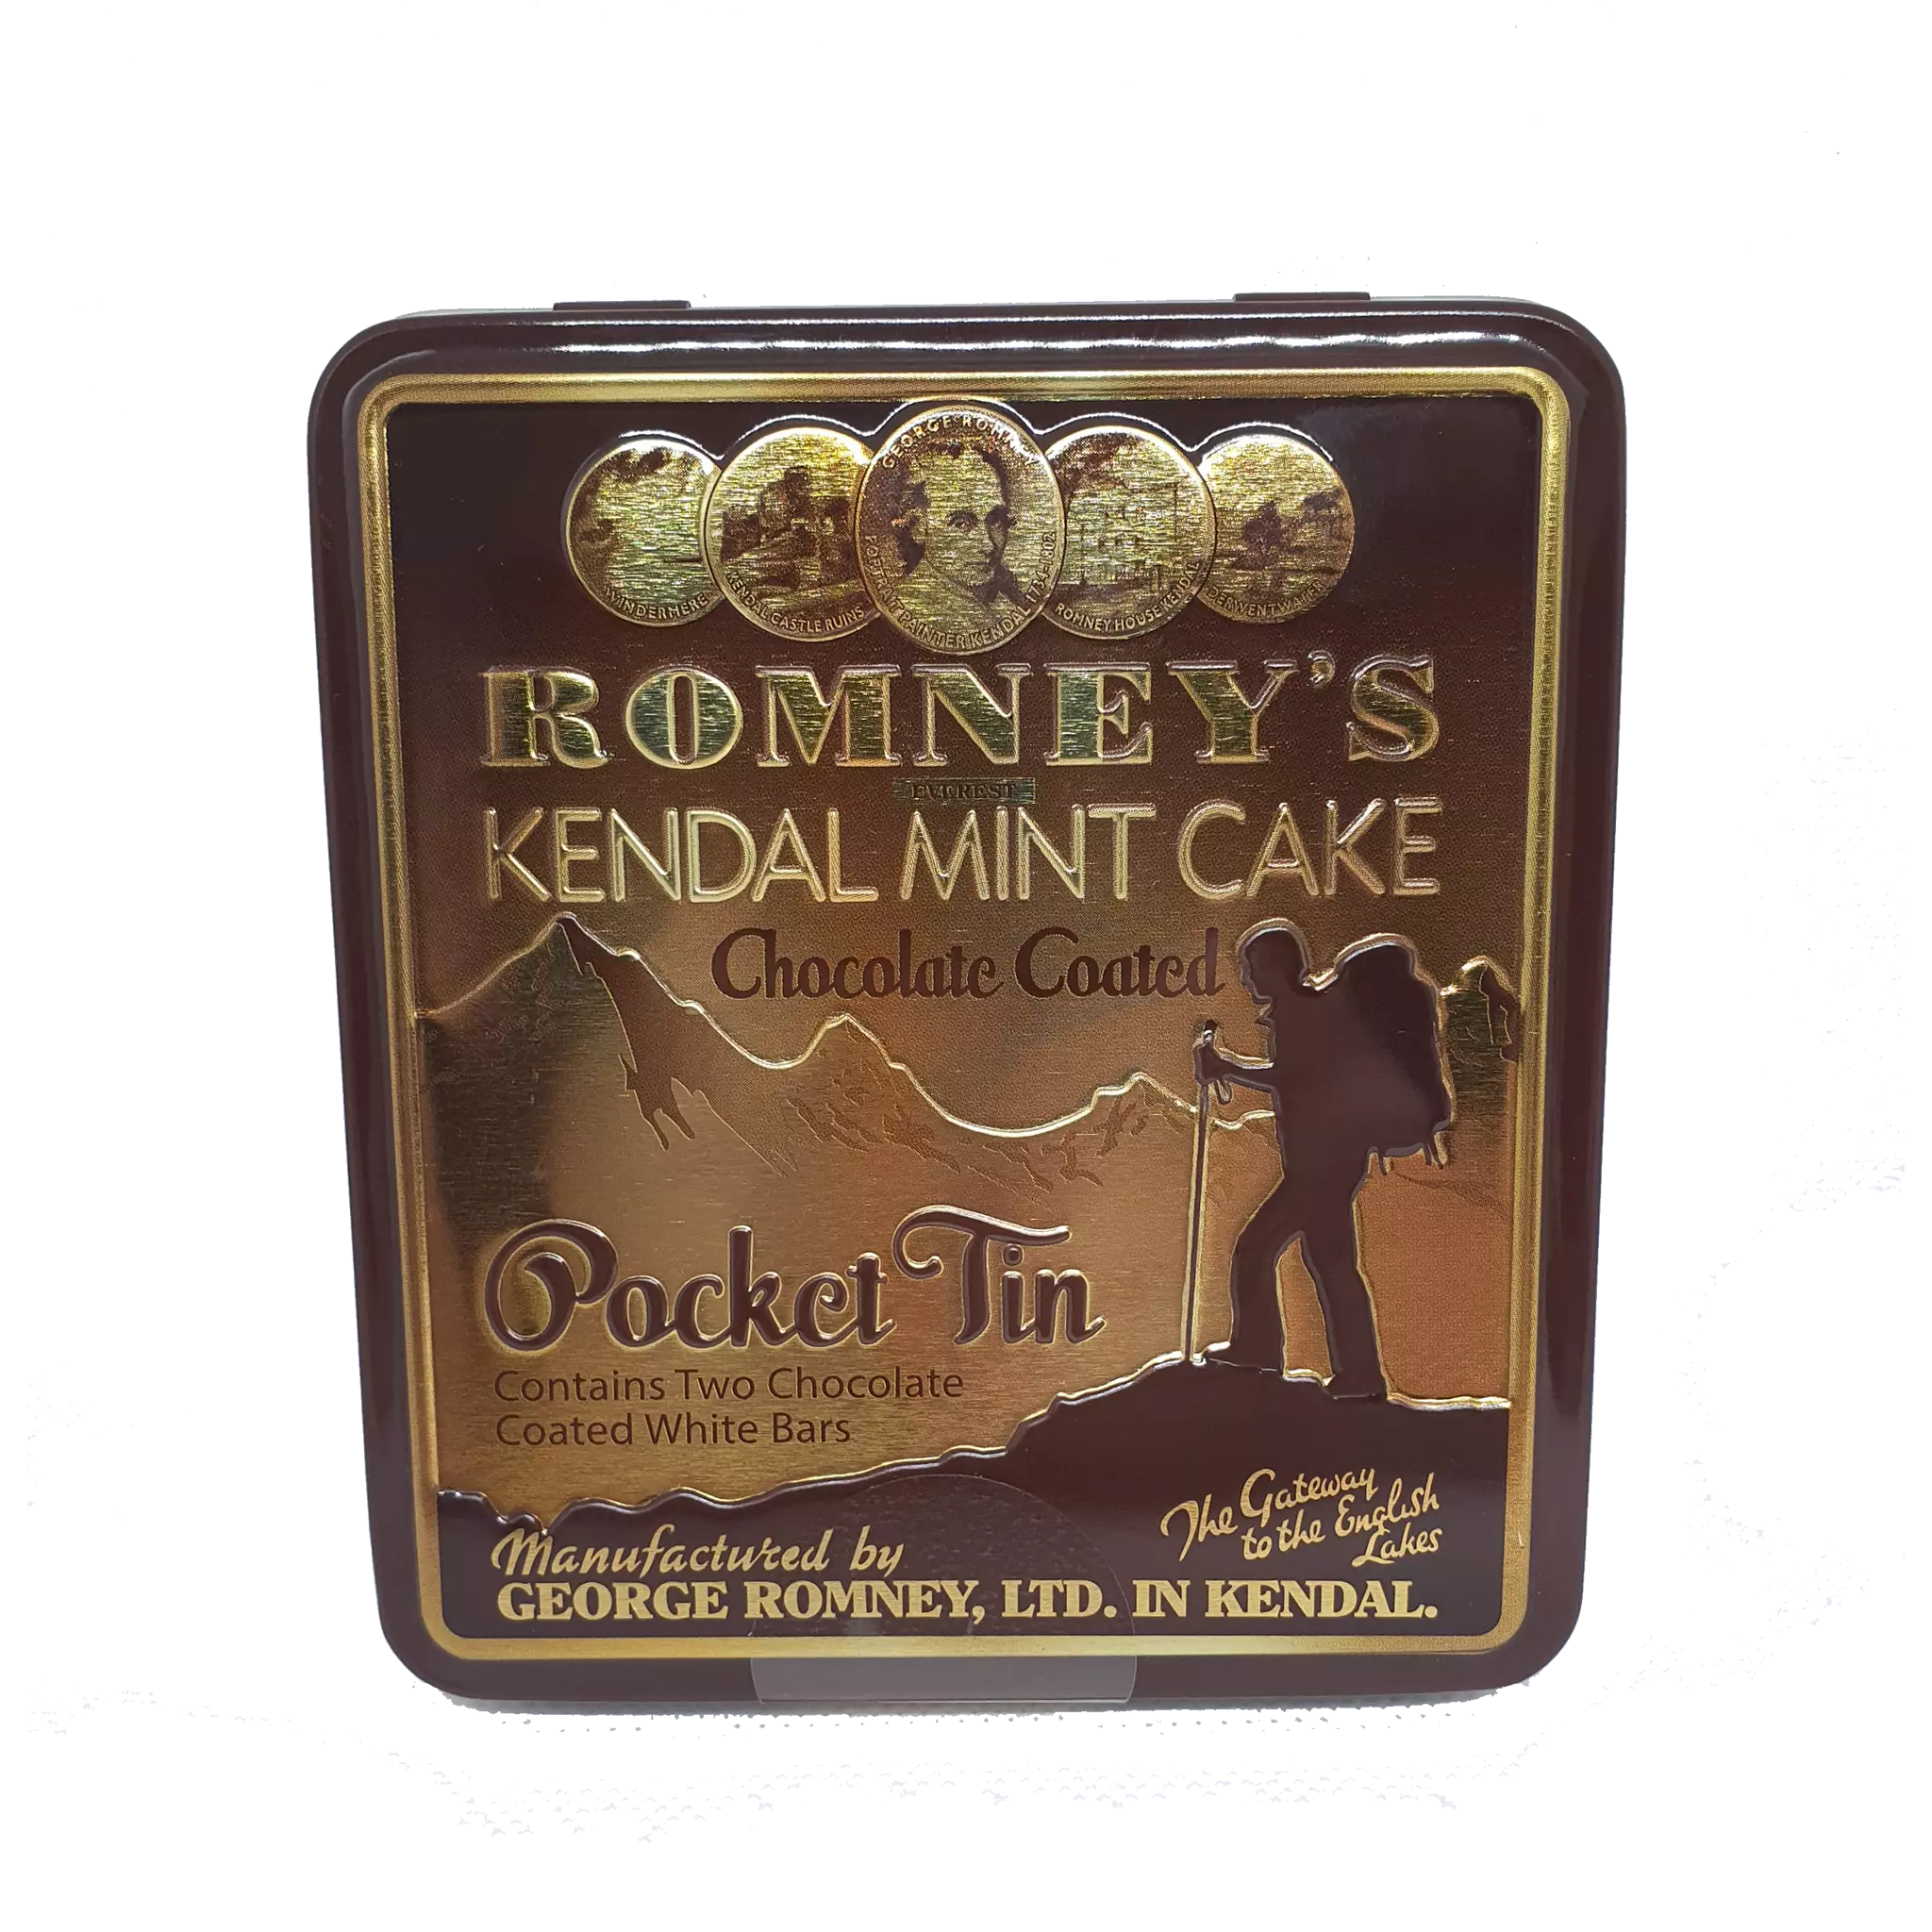 150g Pocket Tin Chocolate Covered Kendal Mint Cake